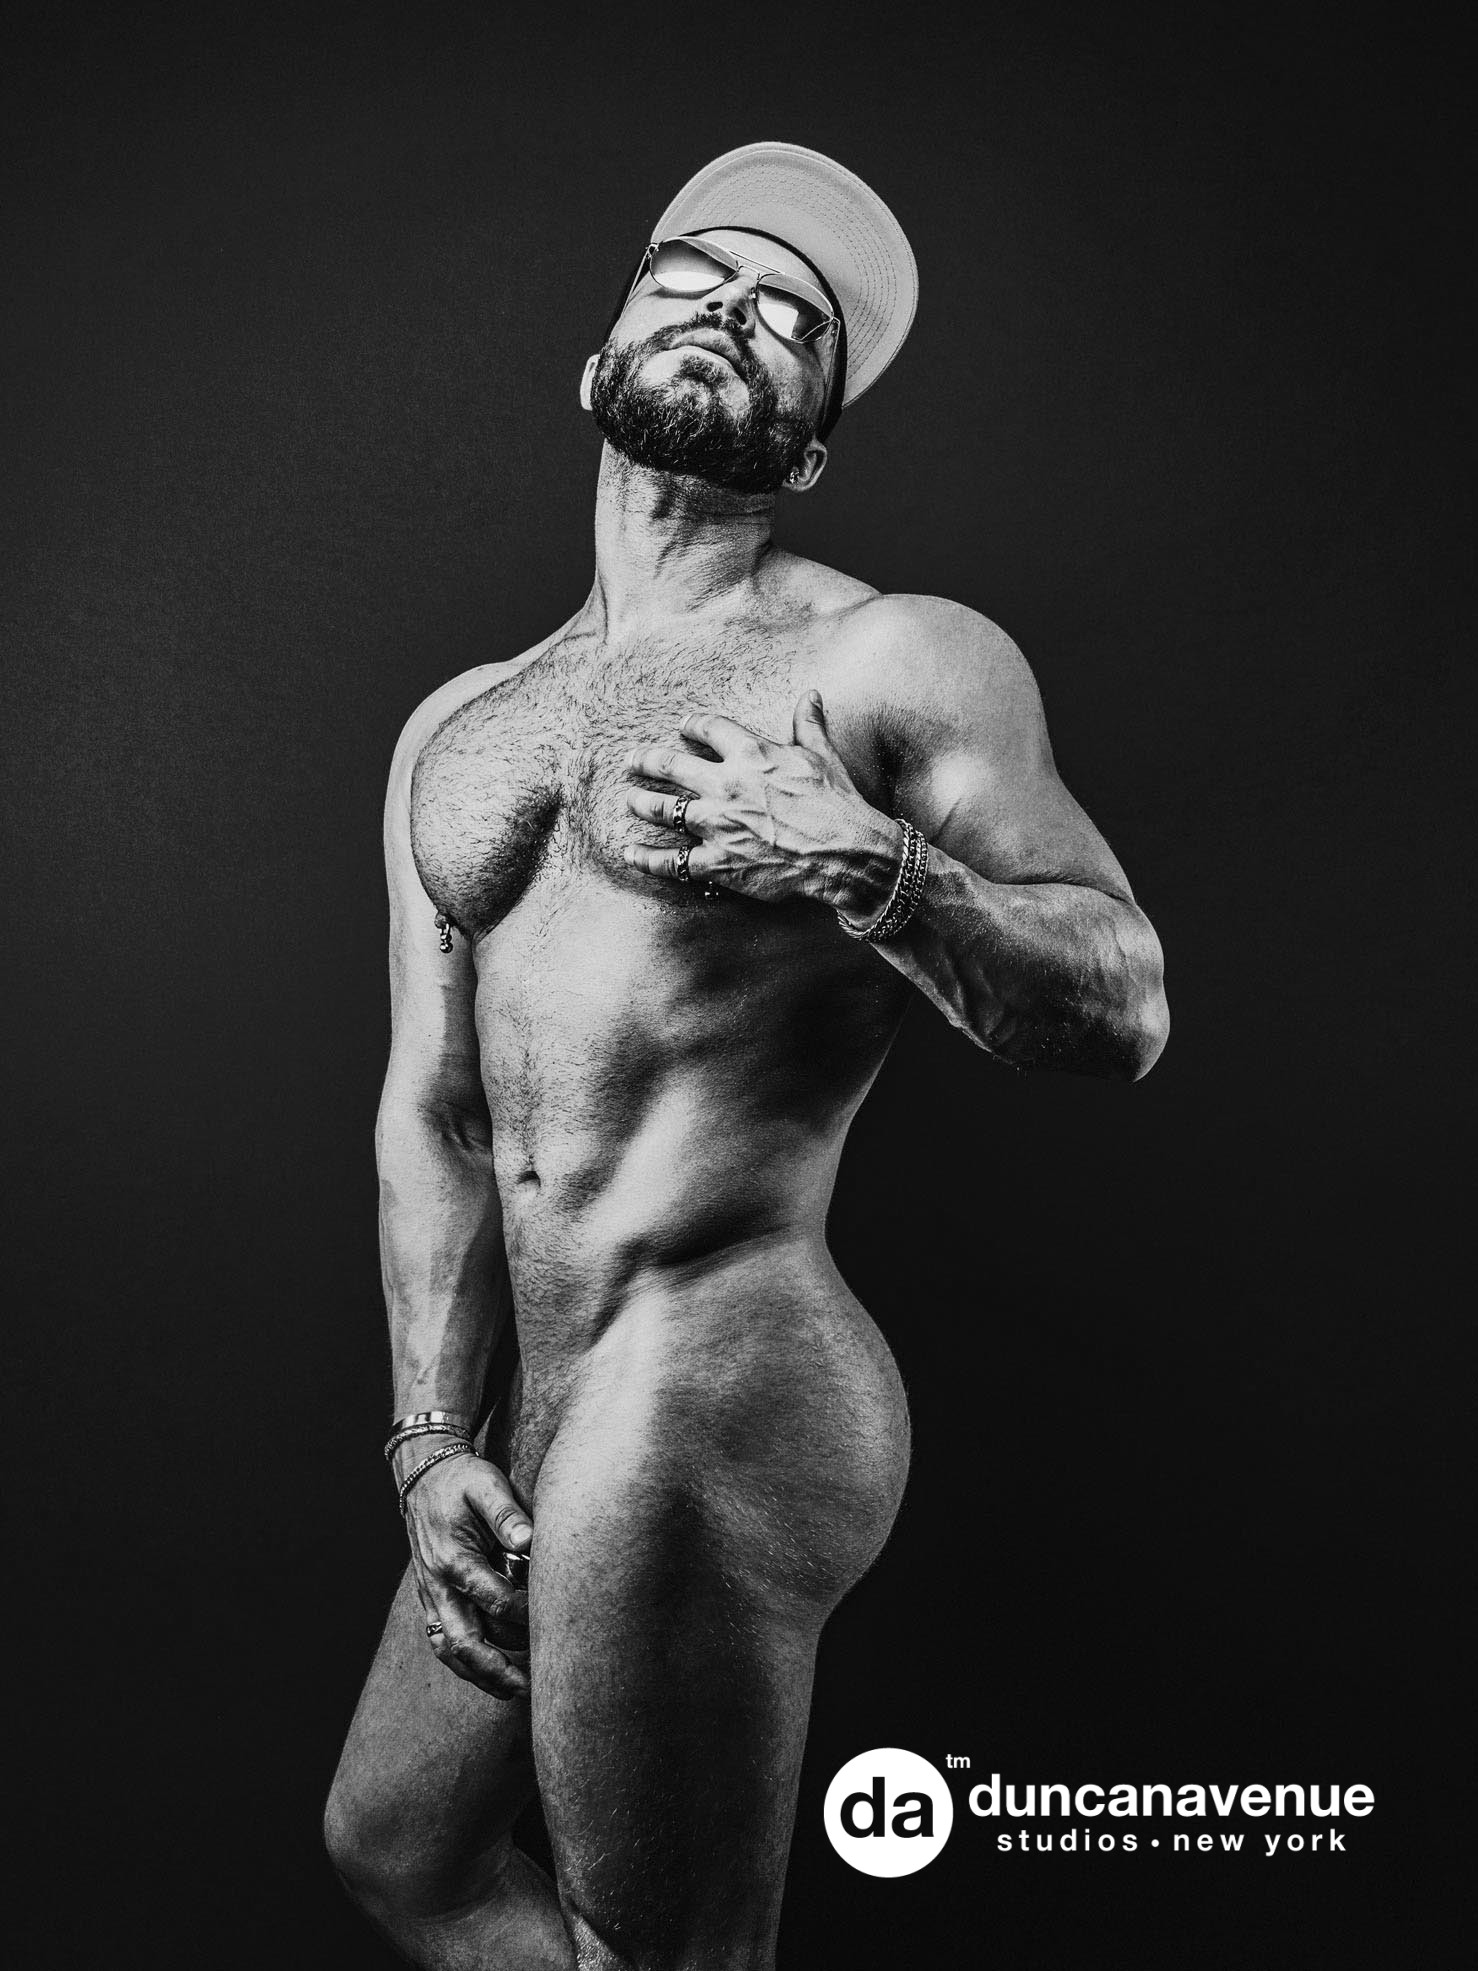 Maxwell Alexander: Pioneering Fine Art Nude Male Photography & Challenging Outdated Social Norms on Nudity and Homosexuality